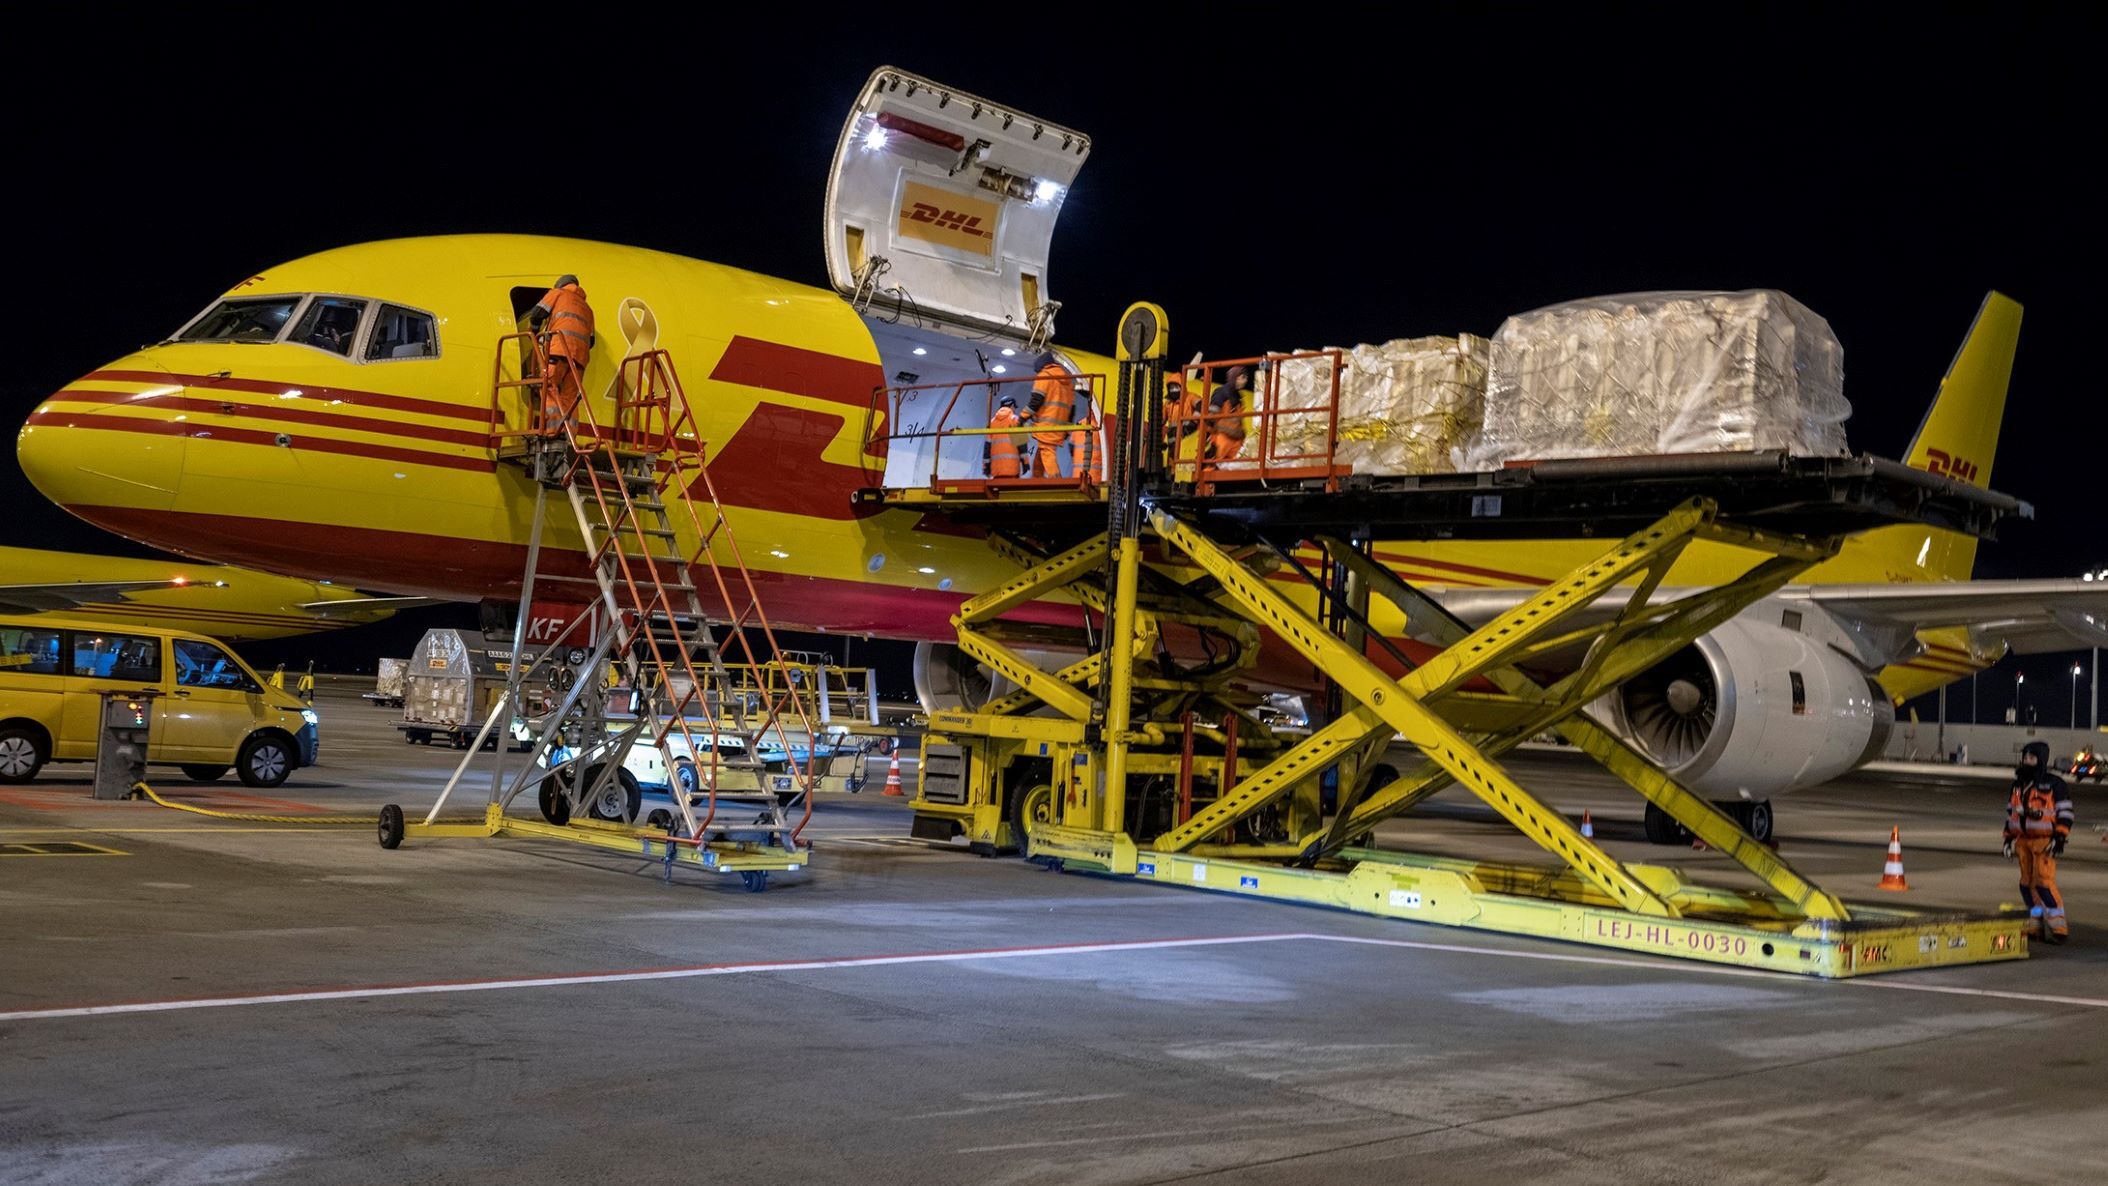 A mustard DHL cargo jet with red lettering loaded with cargo at night.